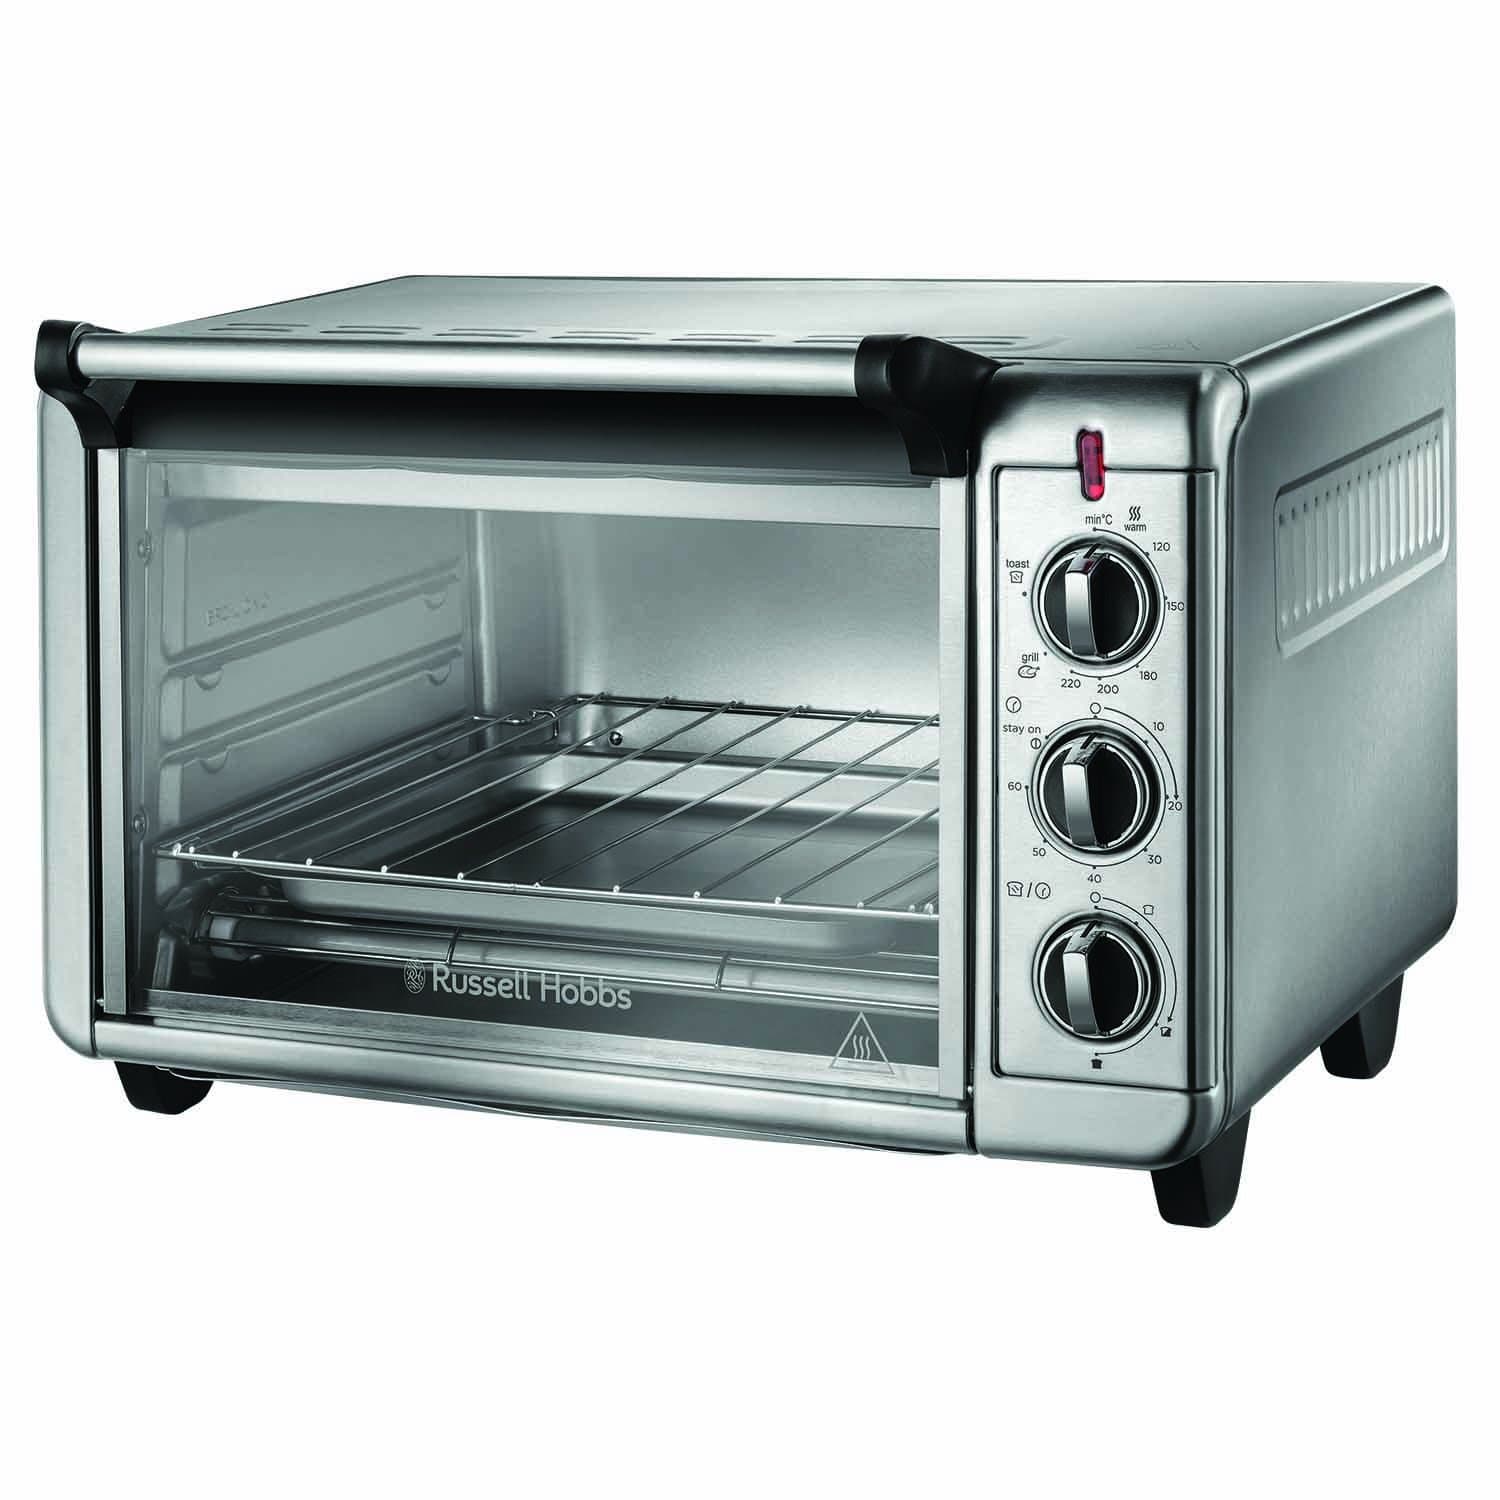 RUSSELL HOBBS AIR EXPRESS MINI OVEN 12.6 LITRES CAPACITY, 1500W - 26090